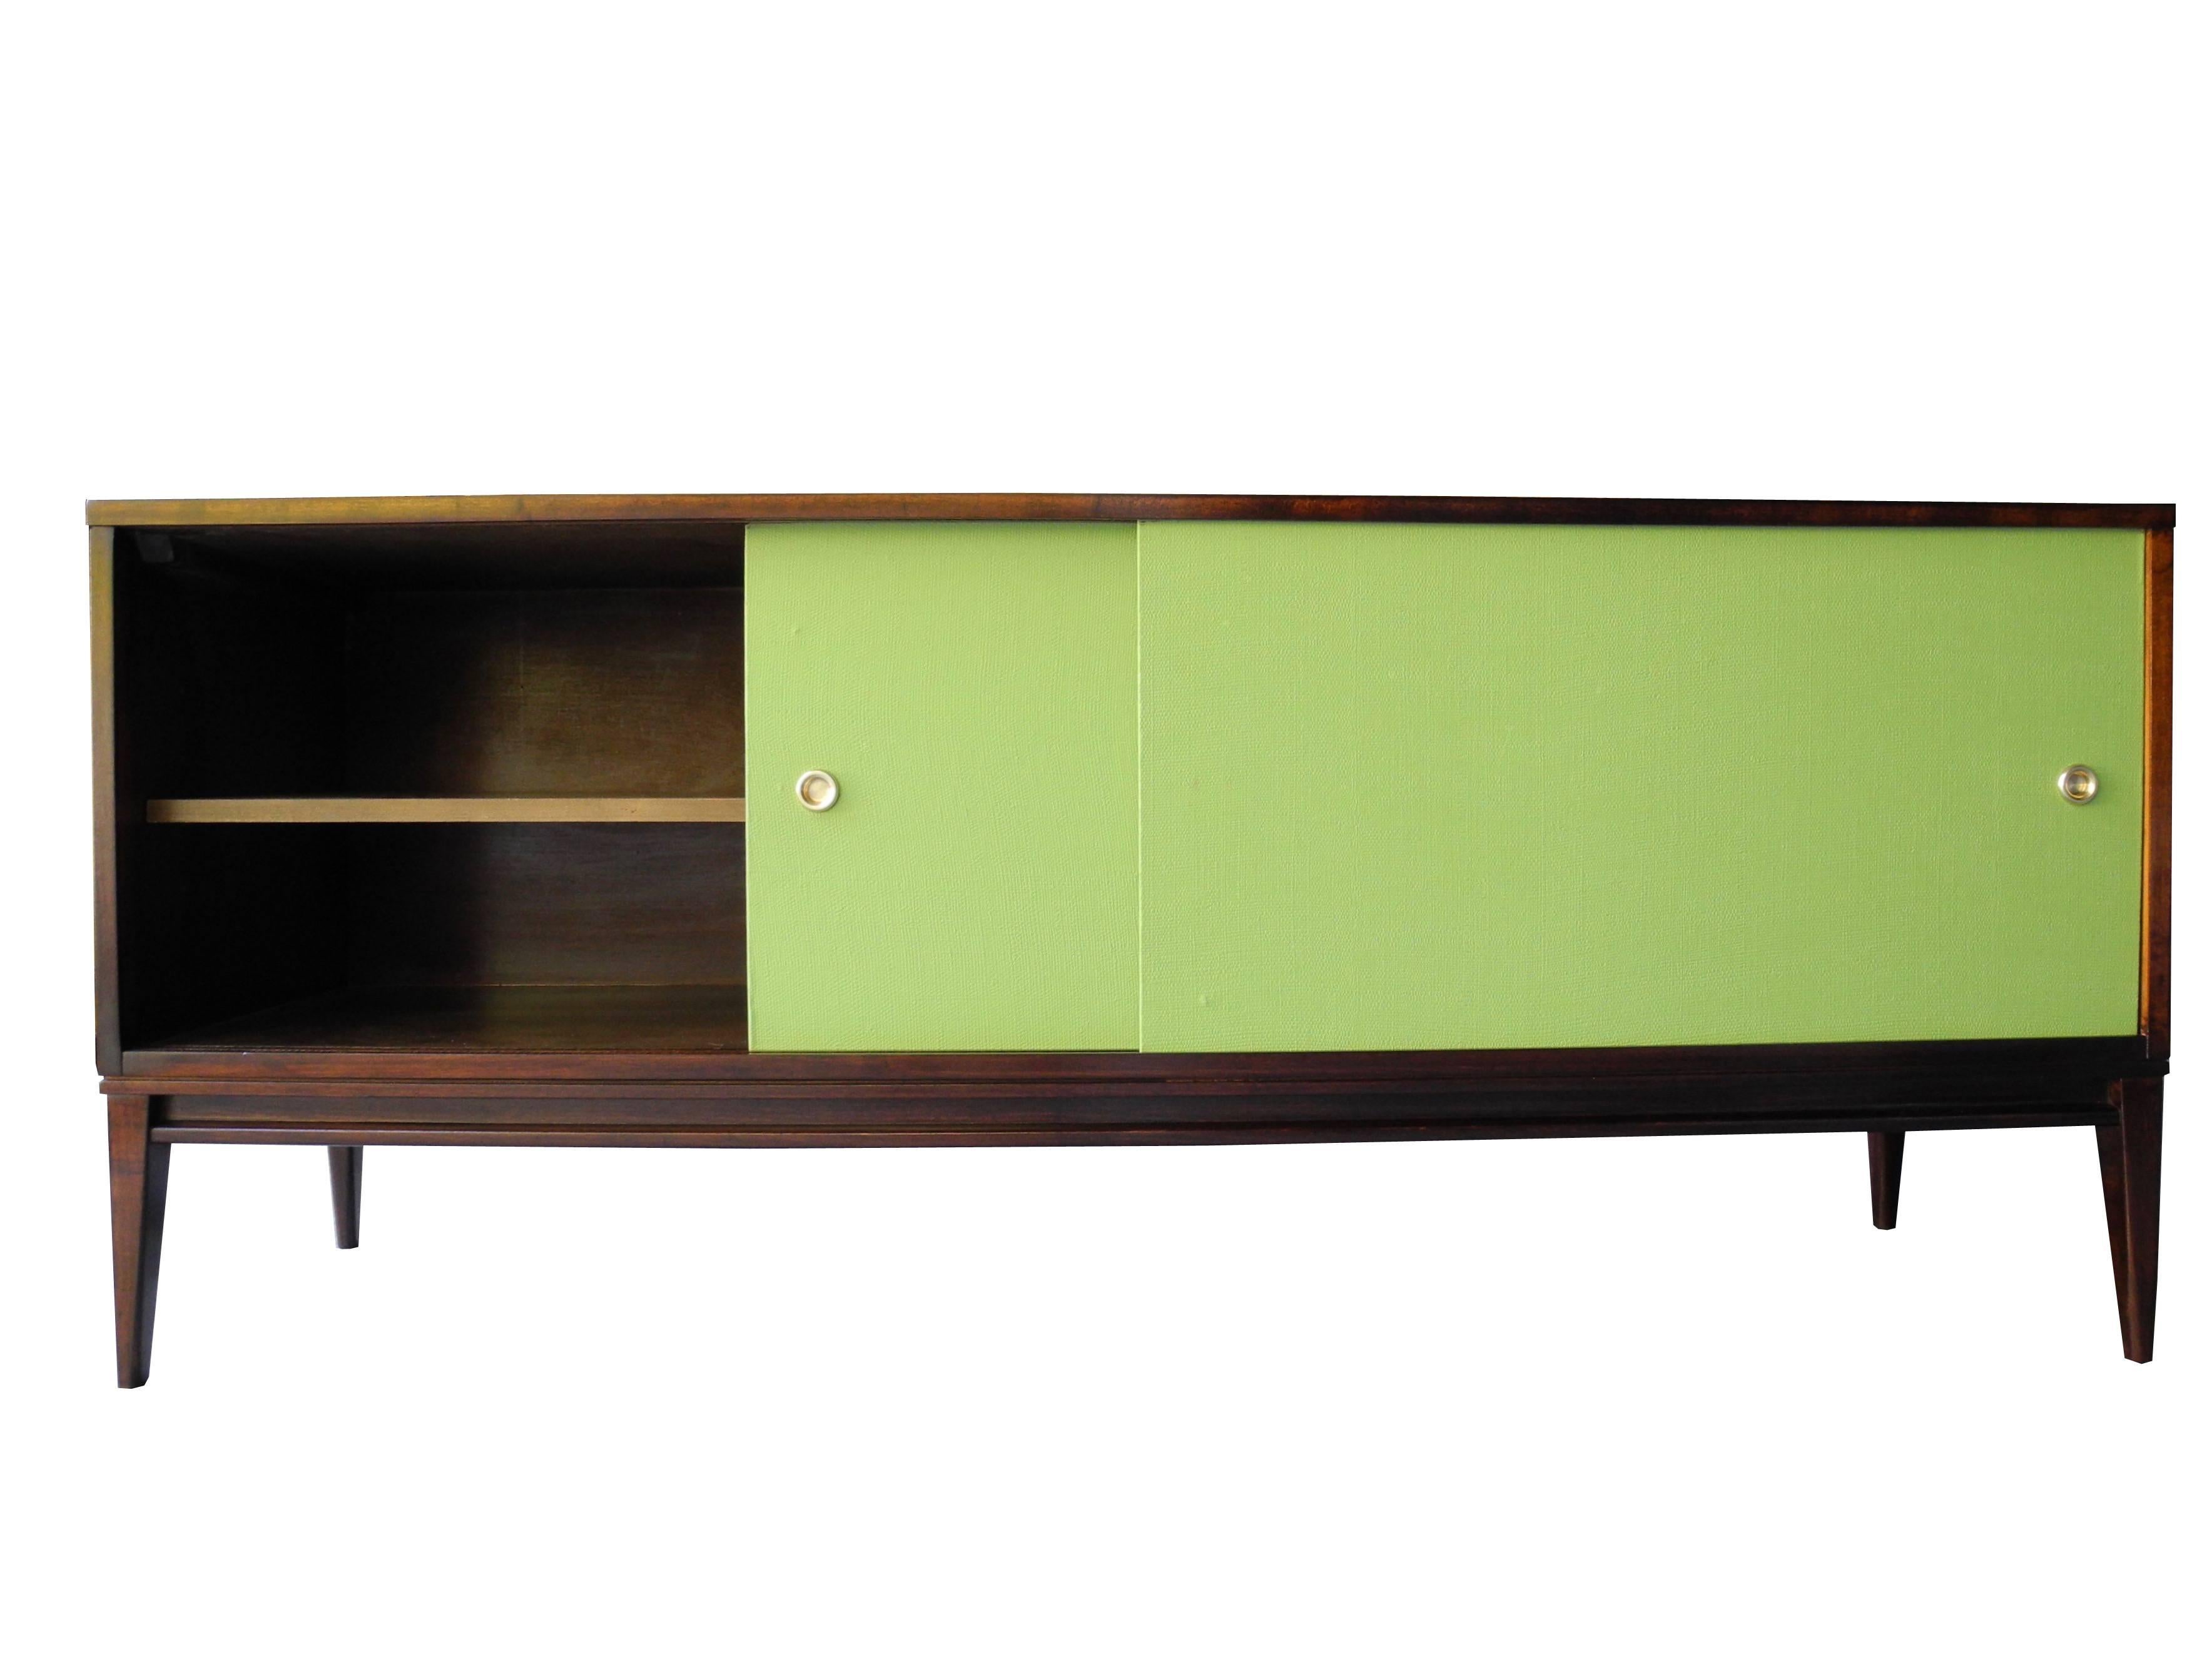 This unique sideboard or credenza comes with two sliding olive green doors and two interior shelves.
It's great for any kind of storage in the home or office.